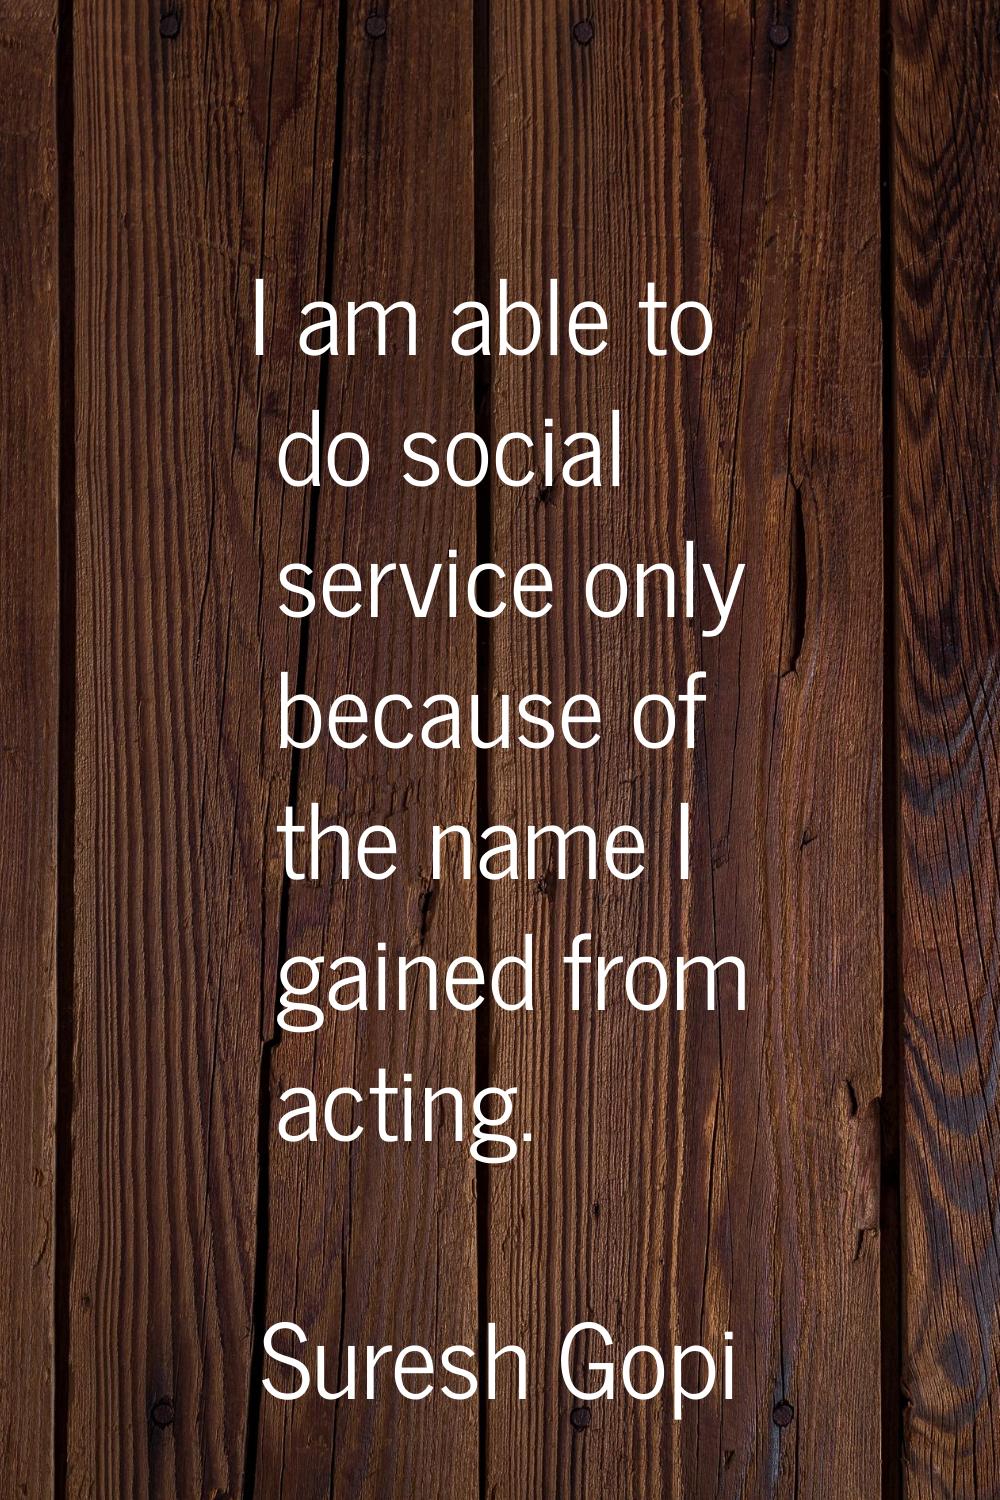 I am able to do social service only because of the name I gained from acting.